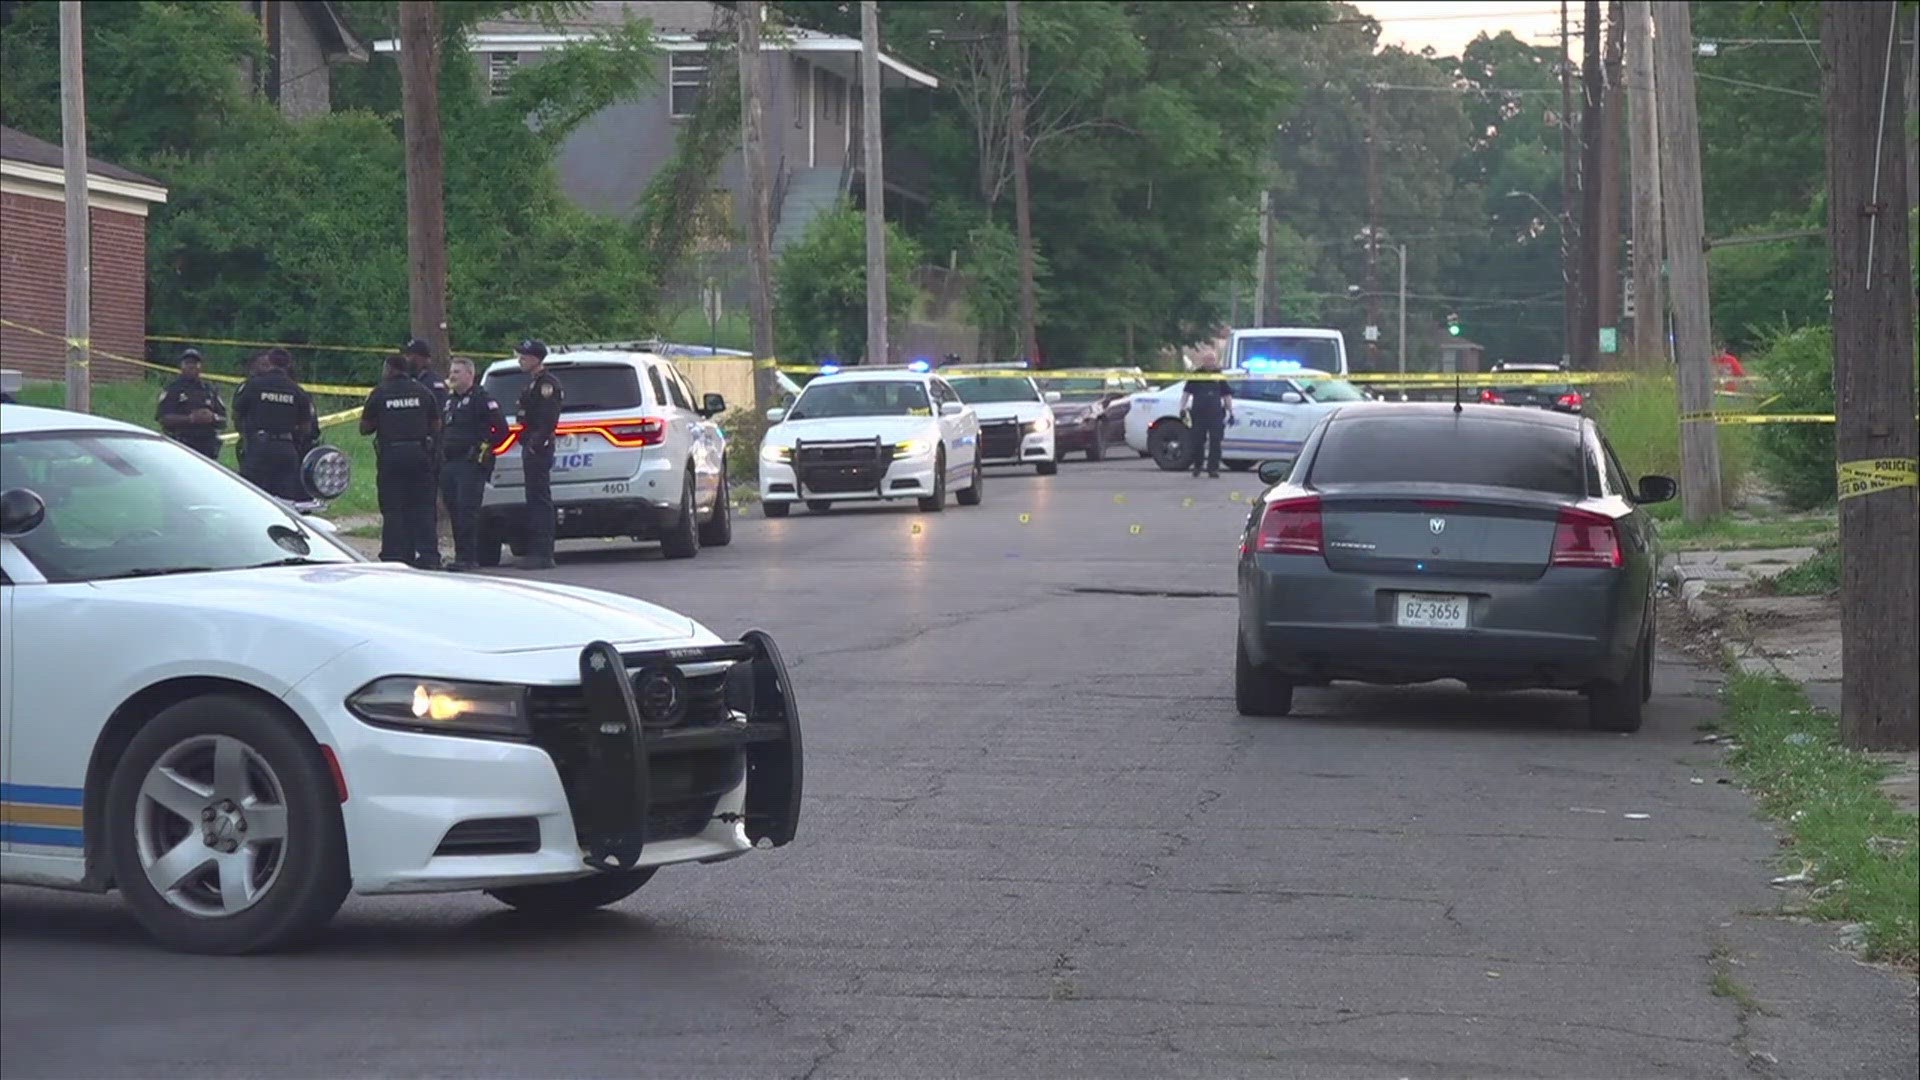 Memphis Police Department (MPD) said officers responded to a shooting in the 1200 block of Latham St. Tuesday, June 27 at 3:57 a.m